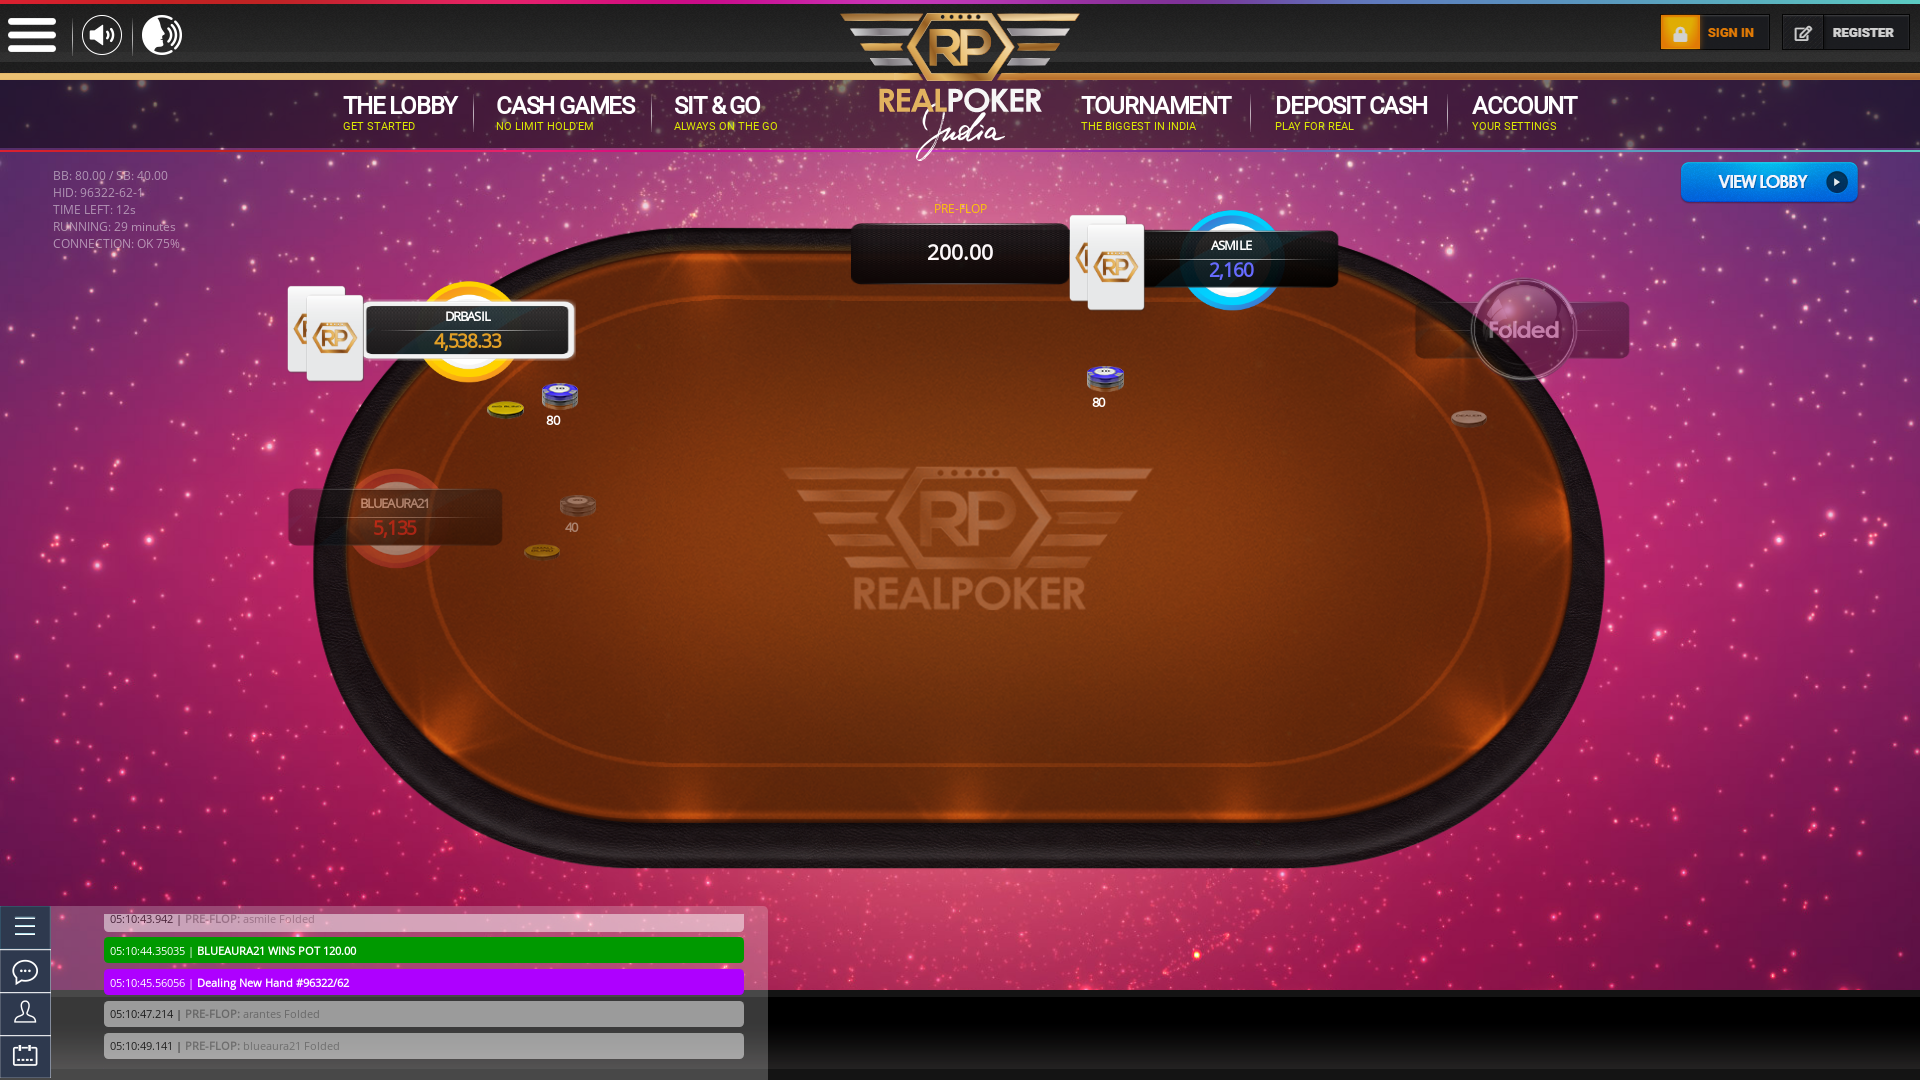 Real poker 10 player table in the 29th minute